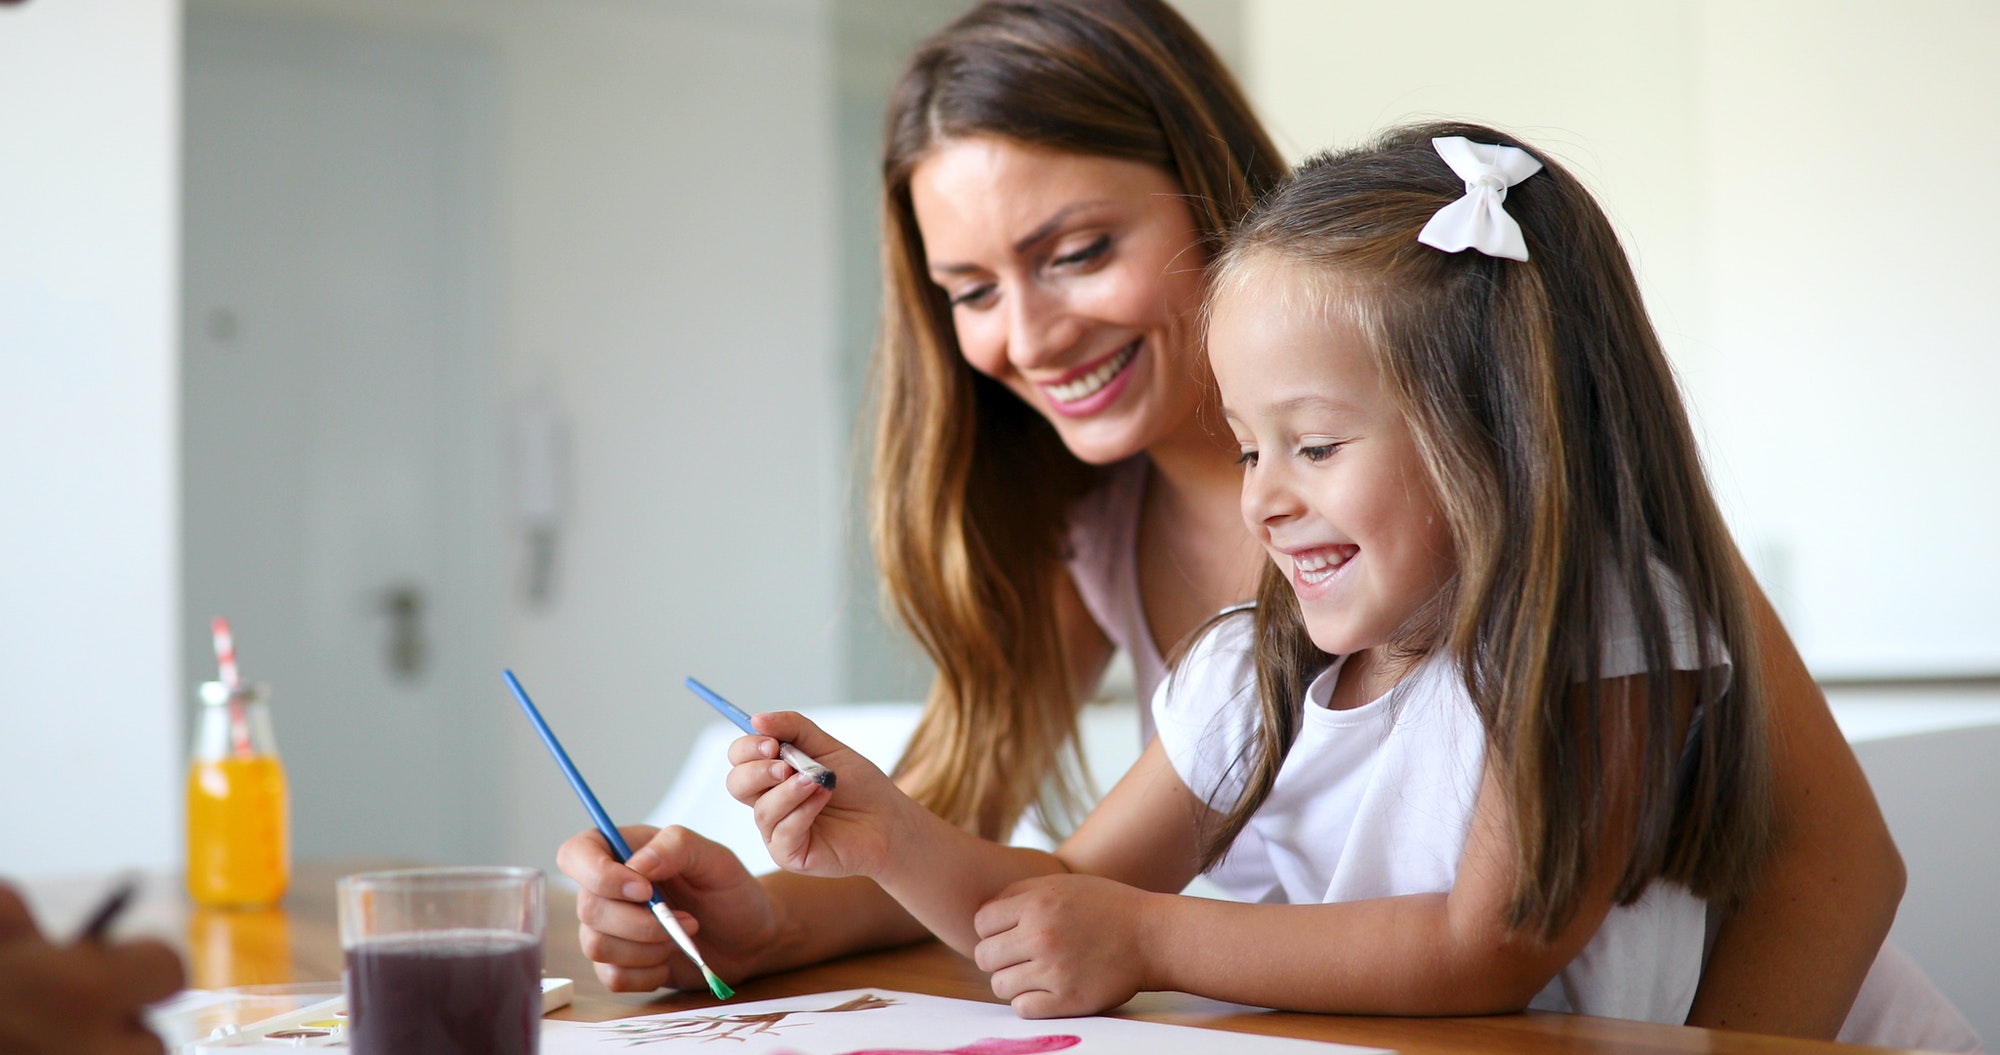 Little girl painting with her mother at home